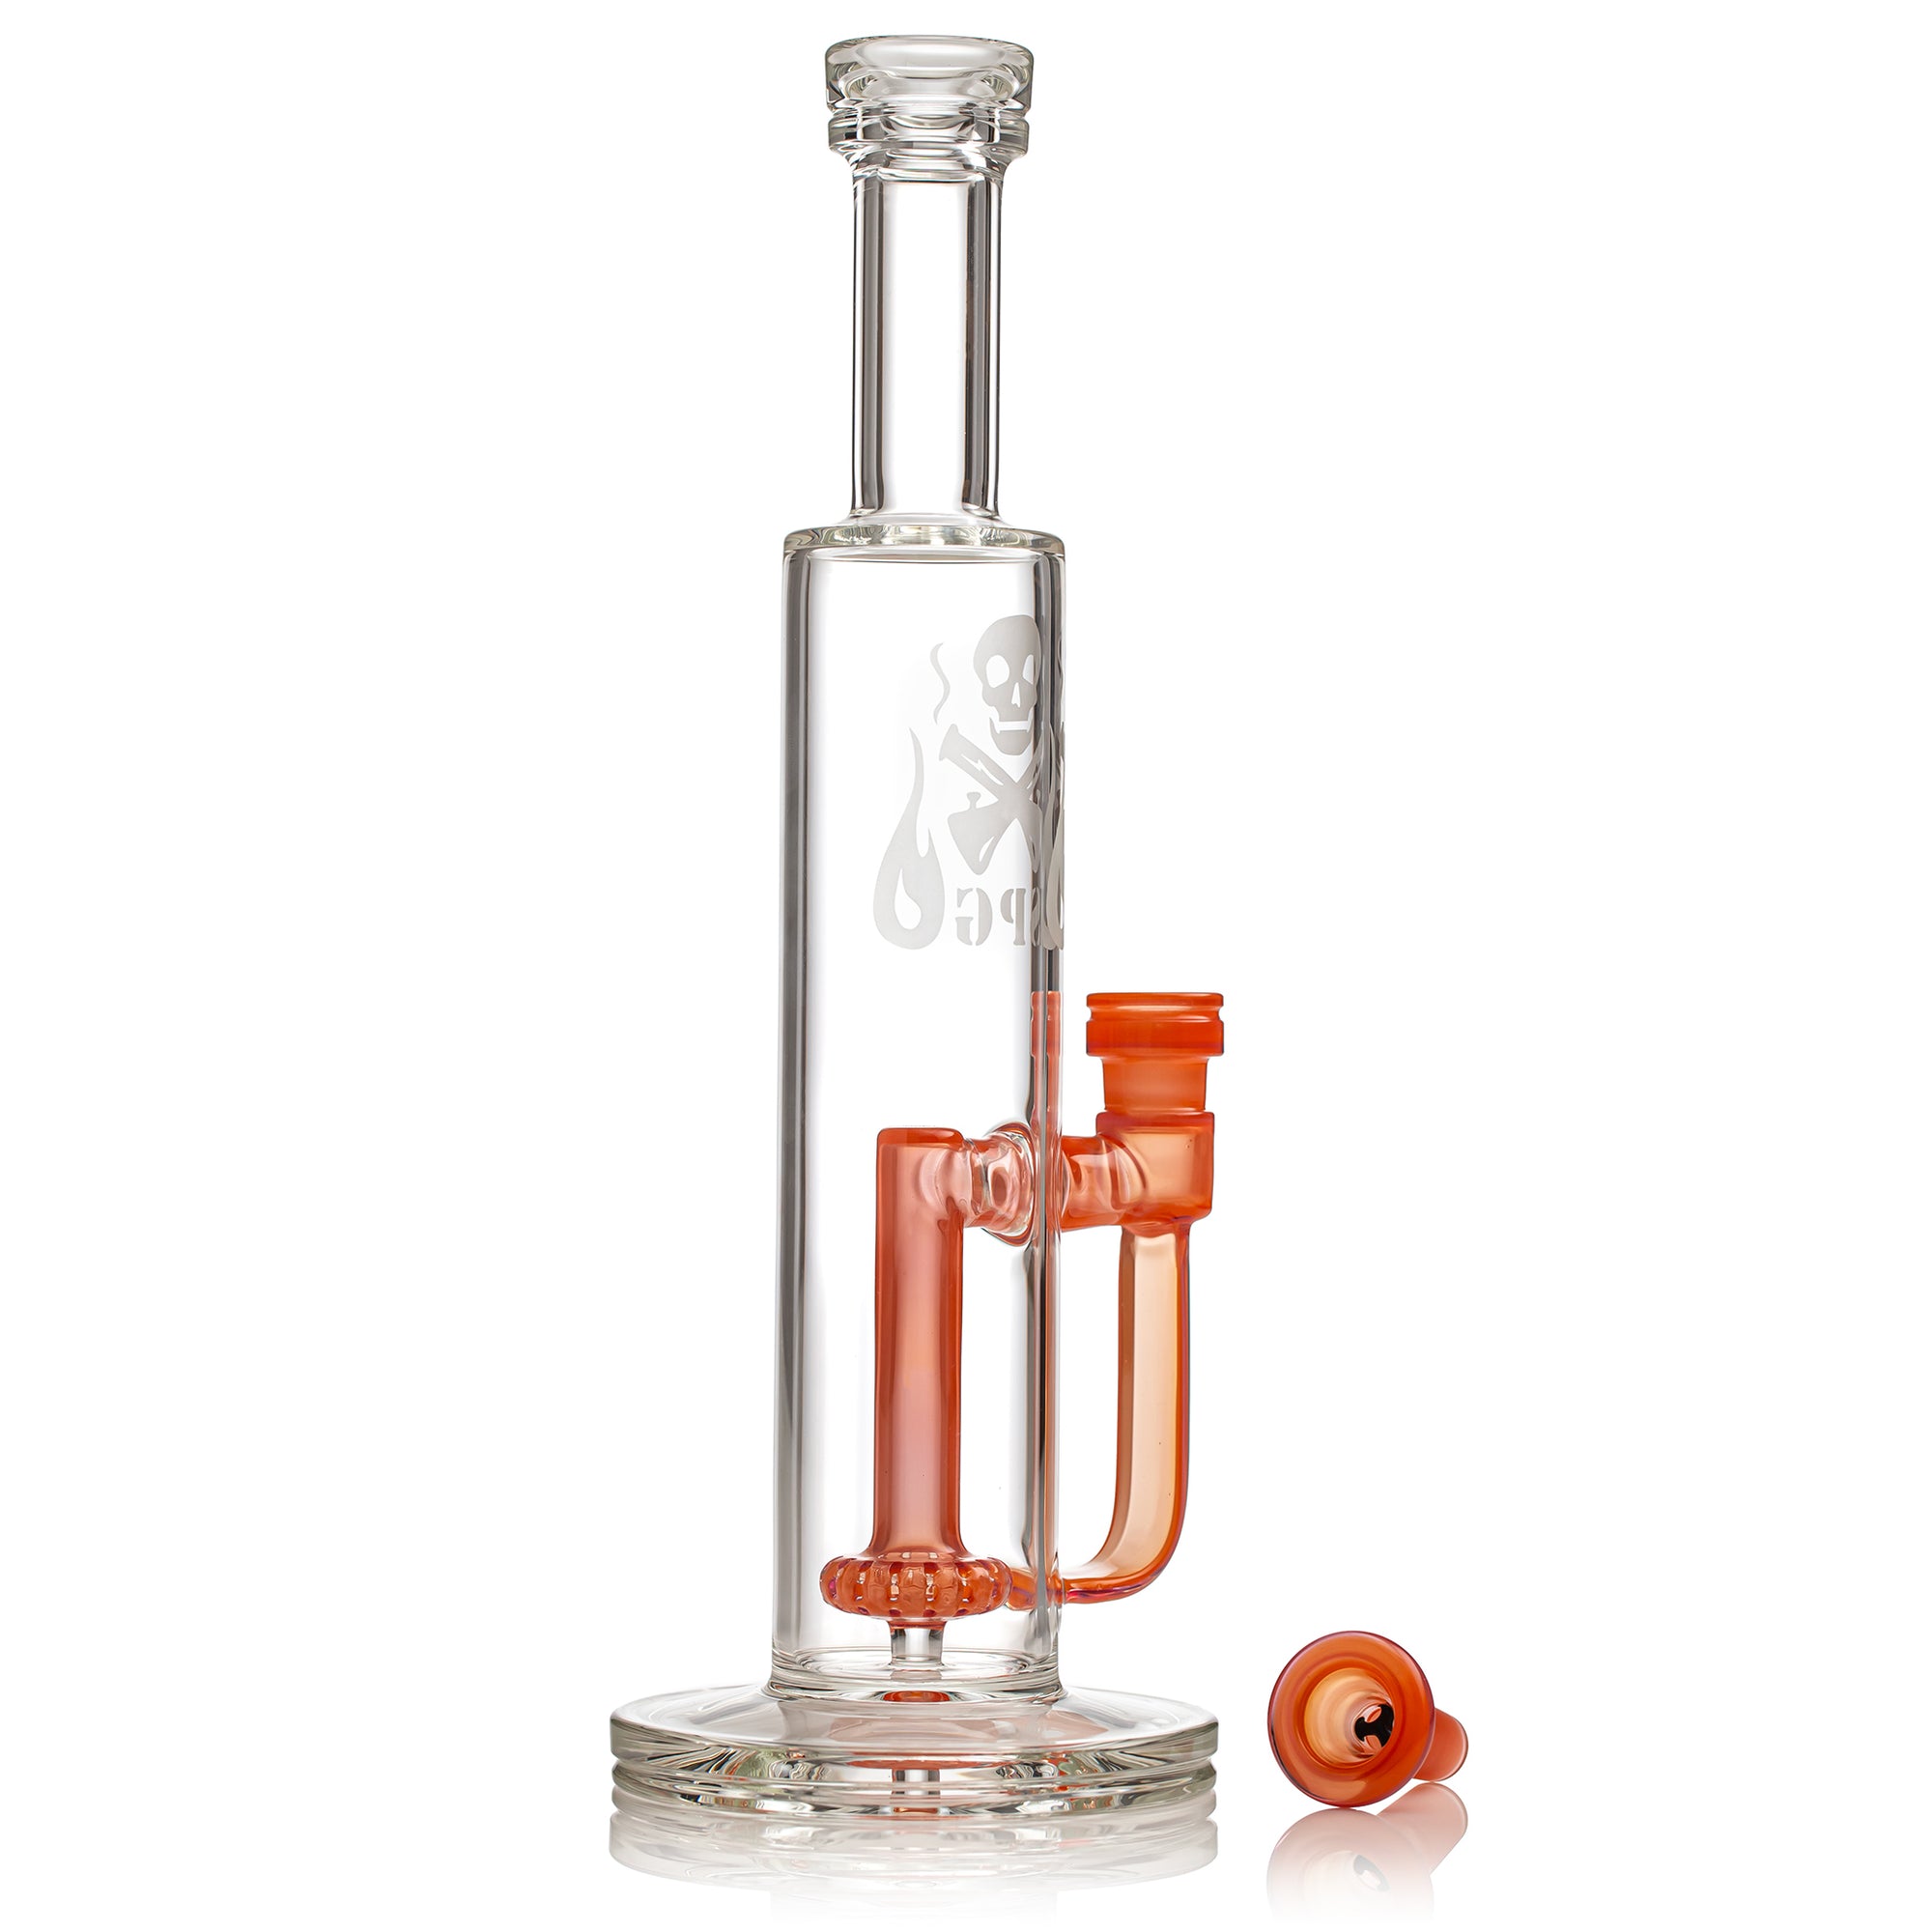 SPG Straight Tube Fixed Circ with Colored Accents (Orange)